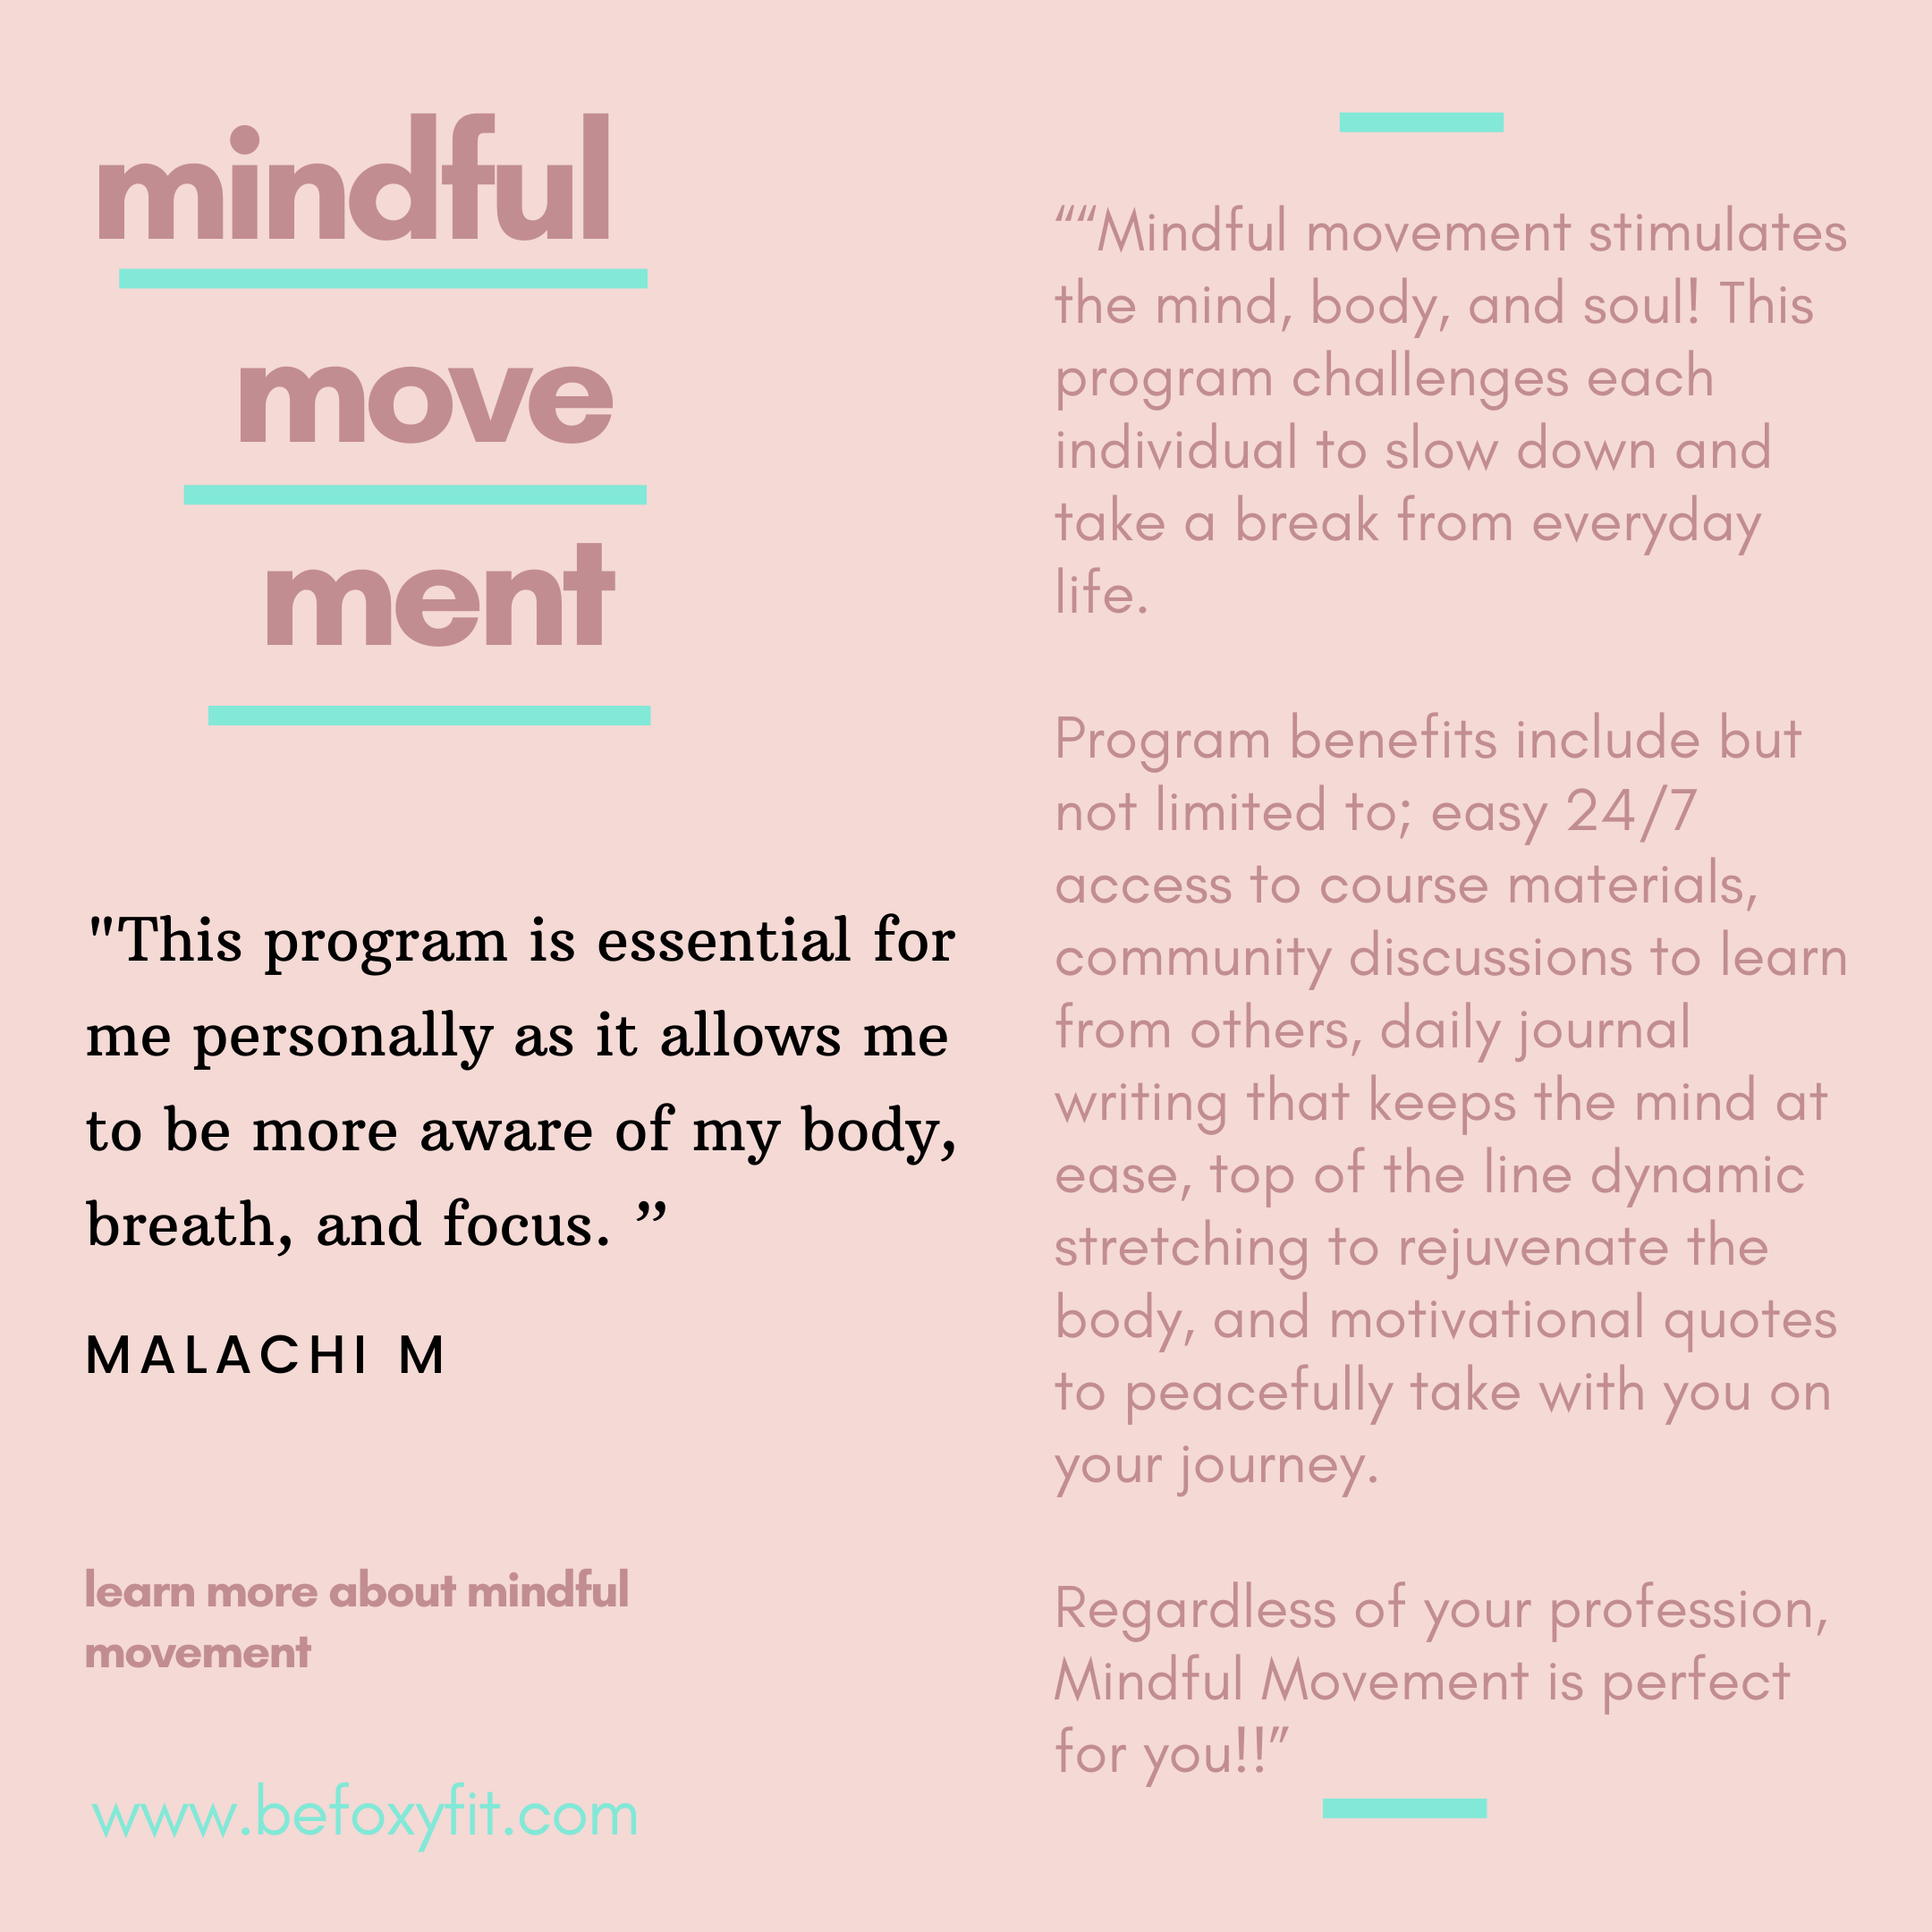 Copy of Copy of Copy of Copy of mindful move ment.png